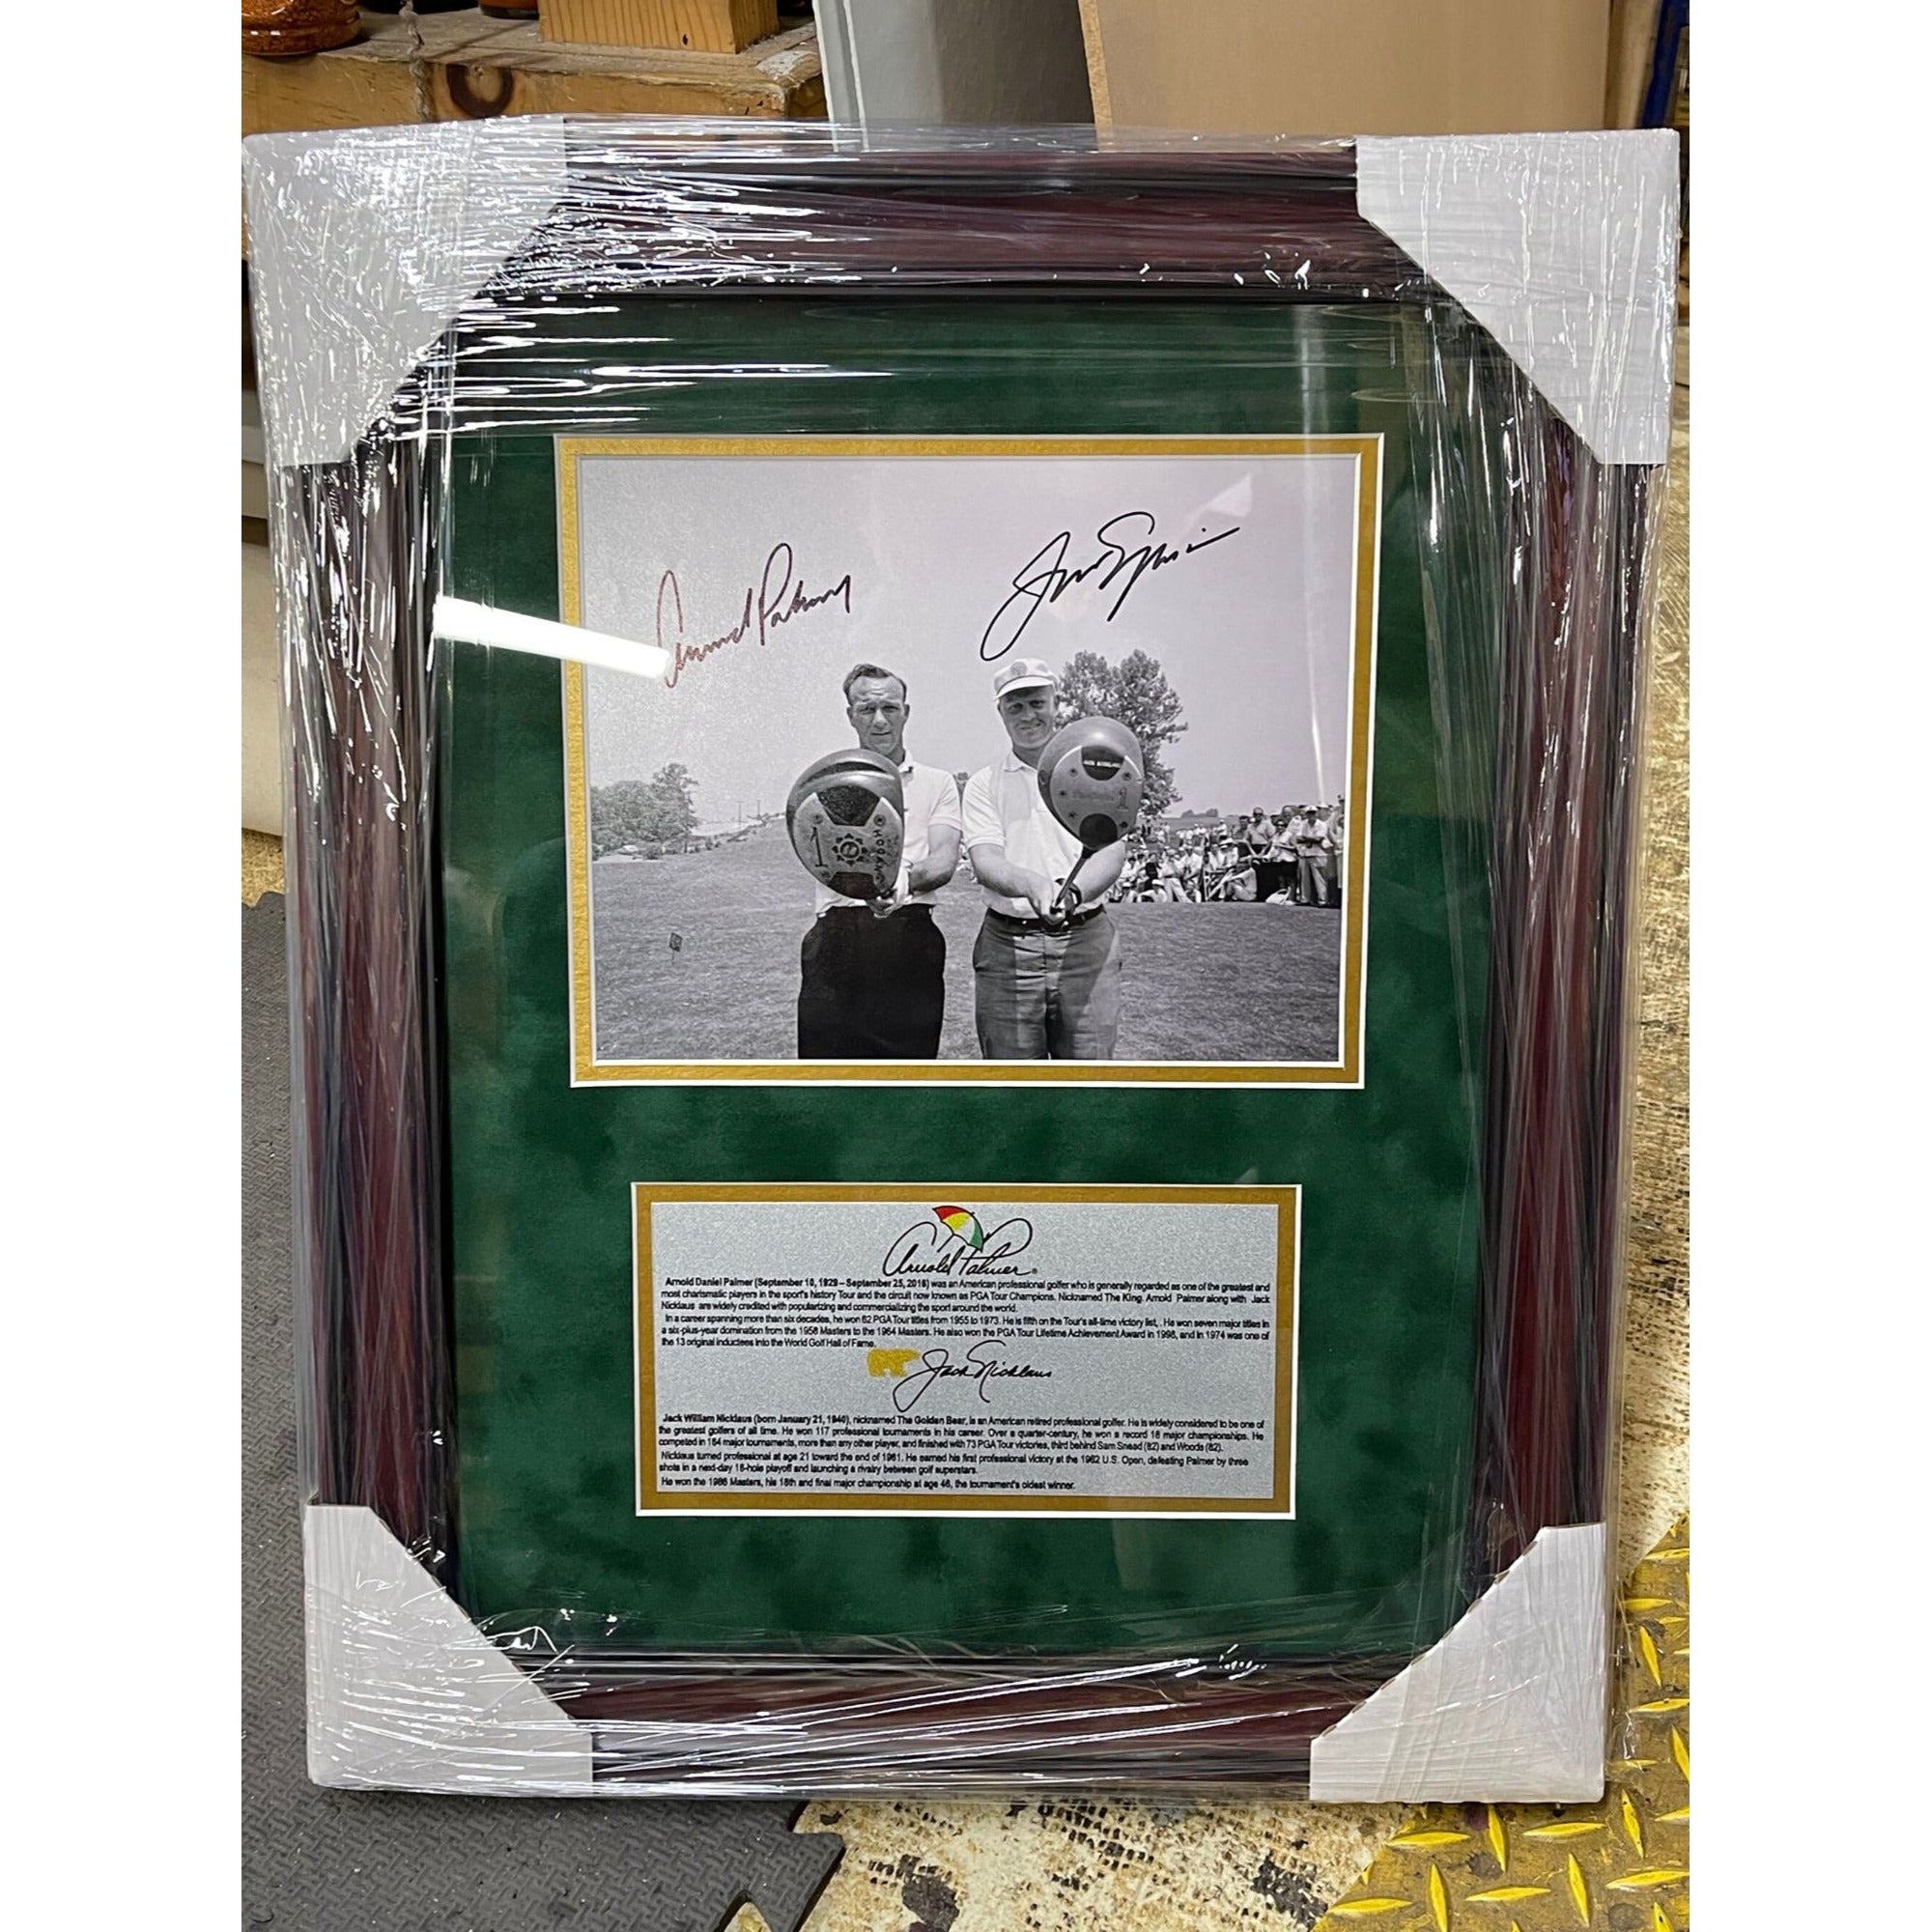 Arnold Palmer and Jack Nicklaus 8x10 photo signed